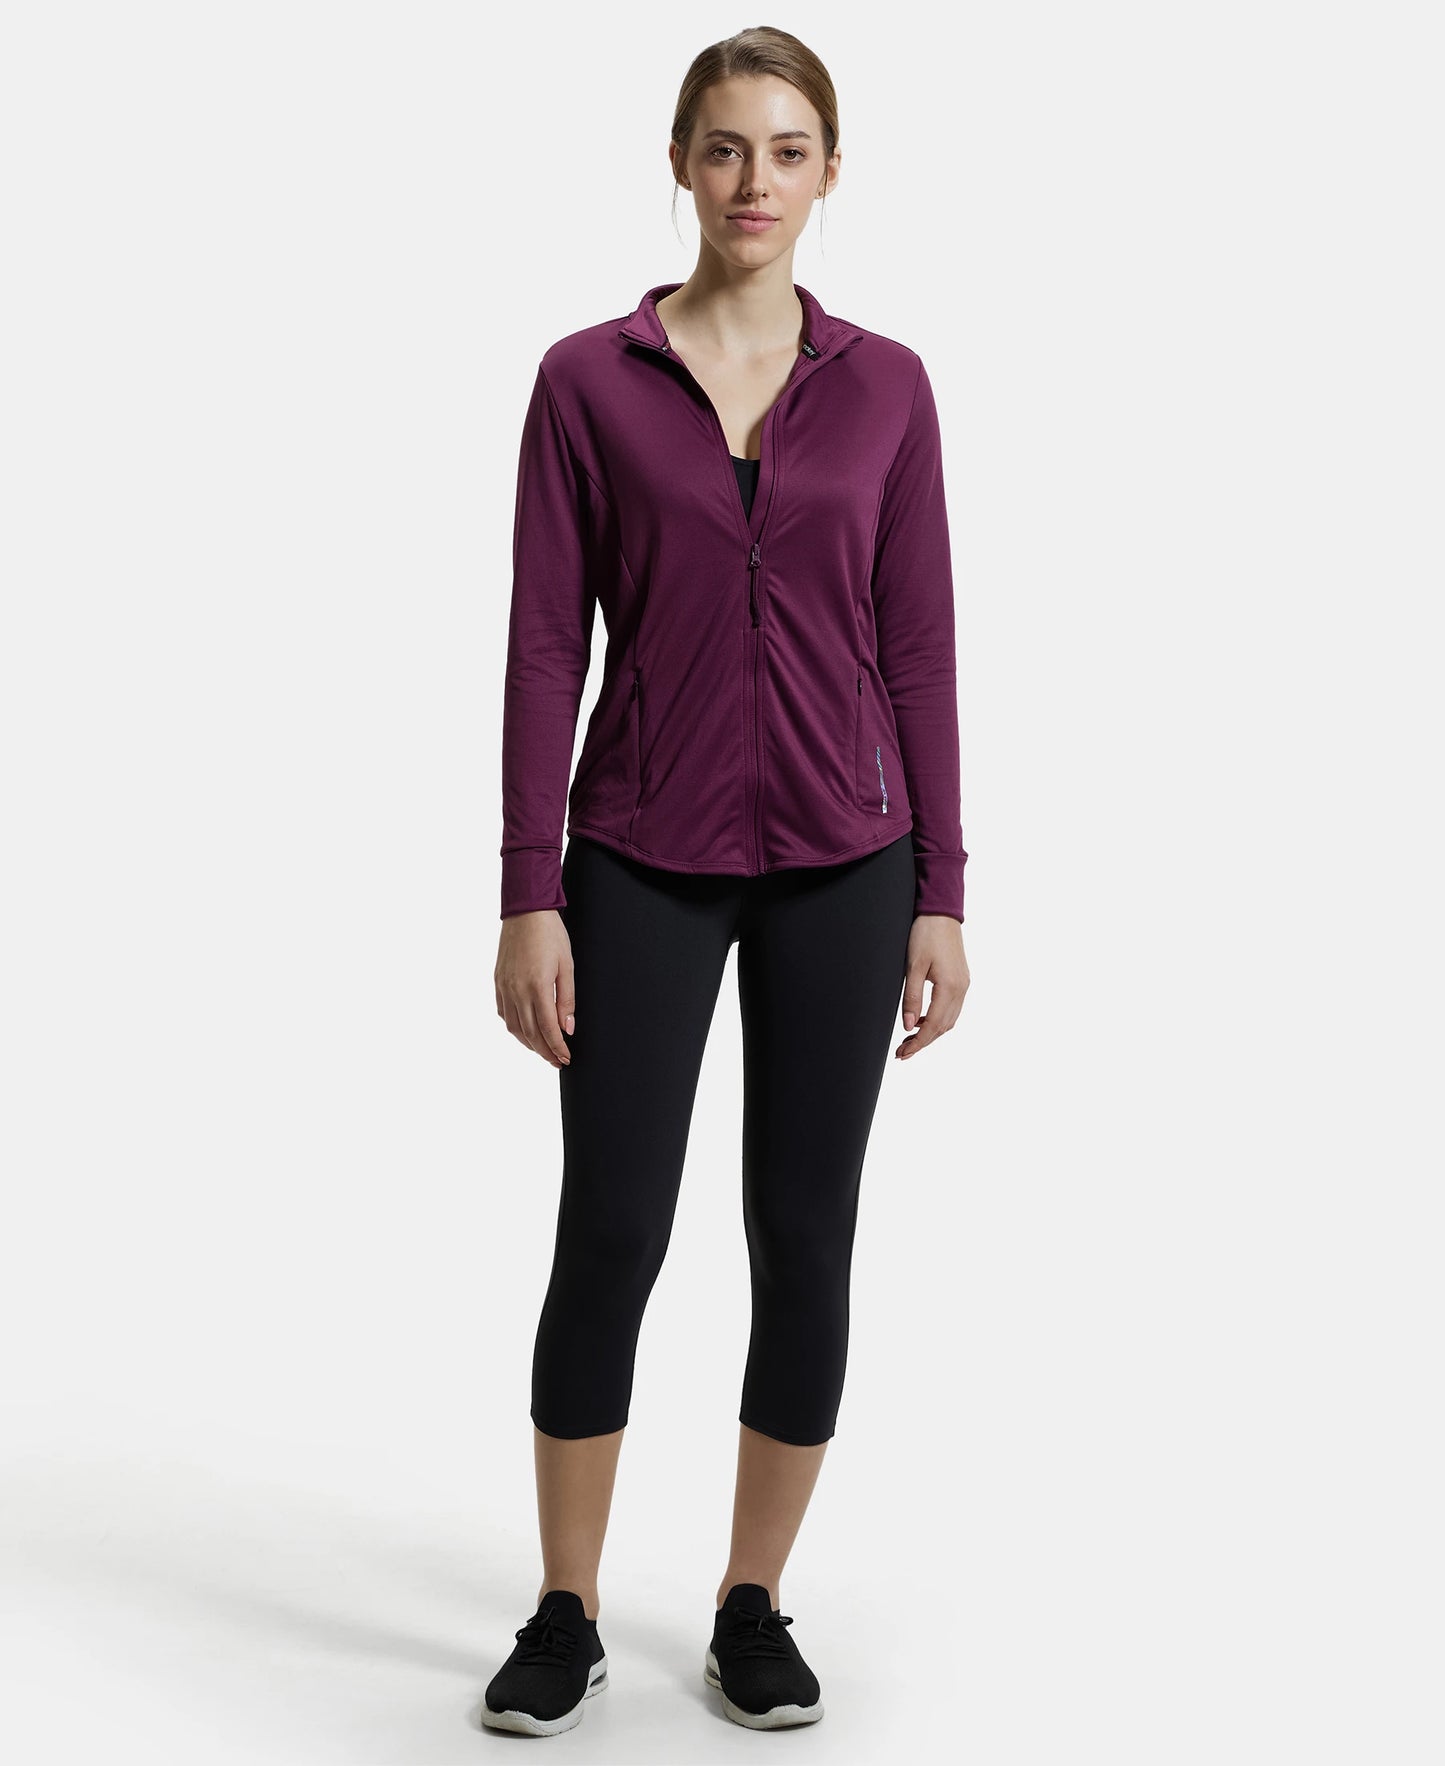 Microfiber Relaxed fit Jacket with Curved Back Hem and StayDry Treatment - Grape Wine-4